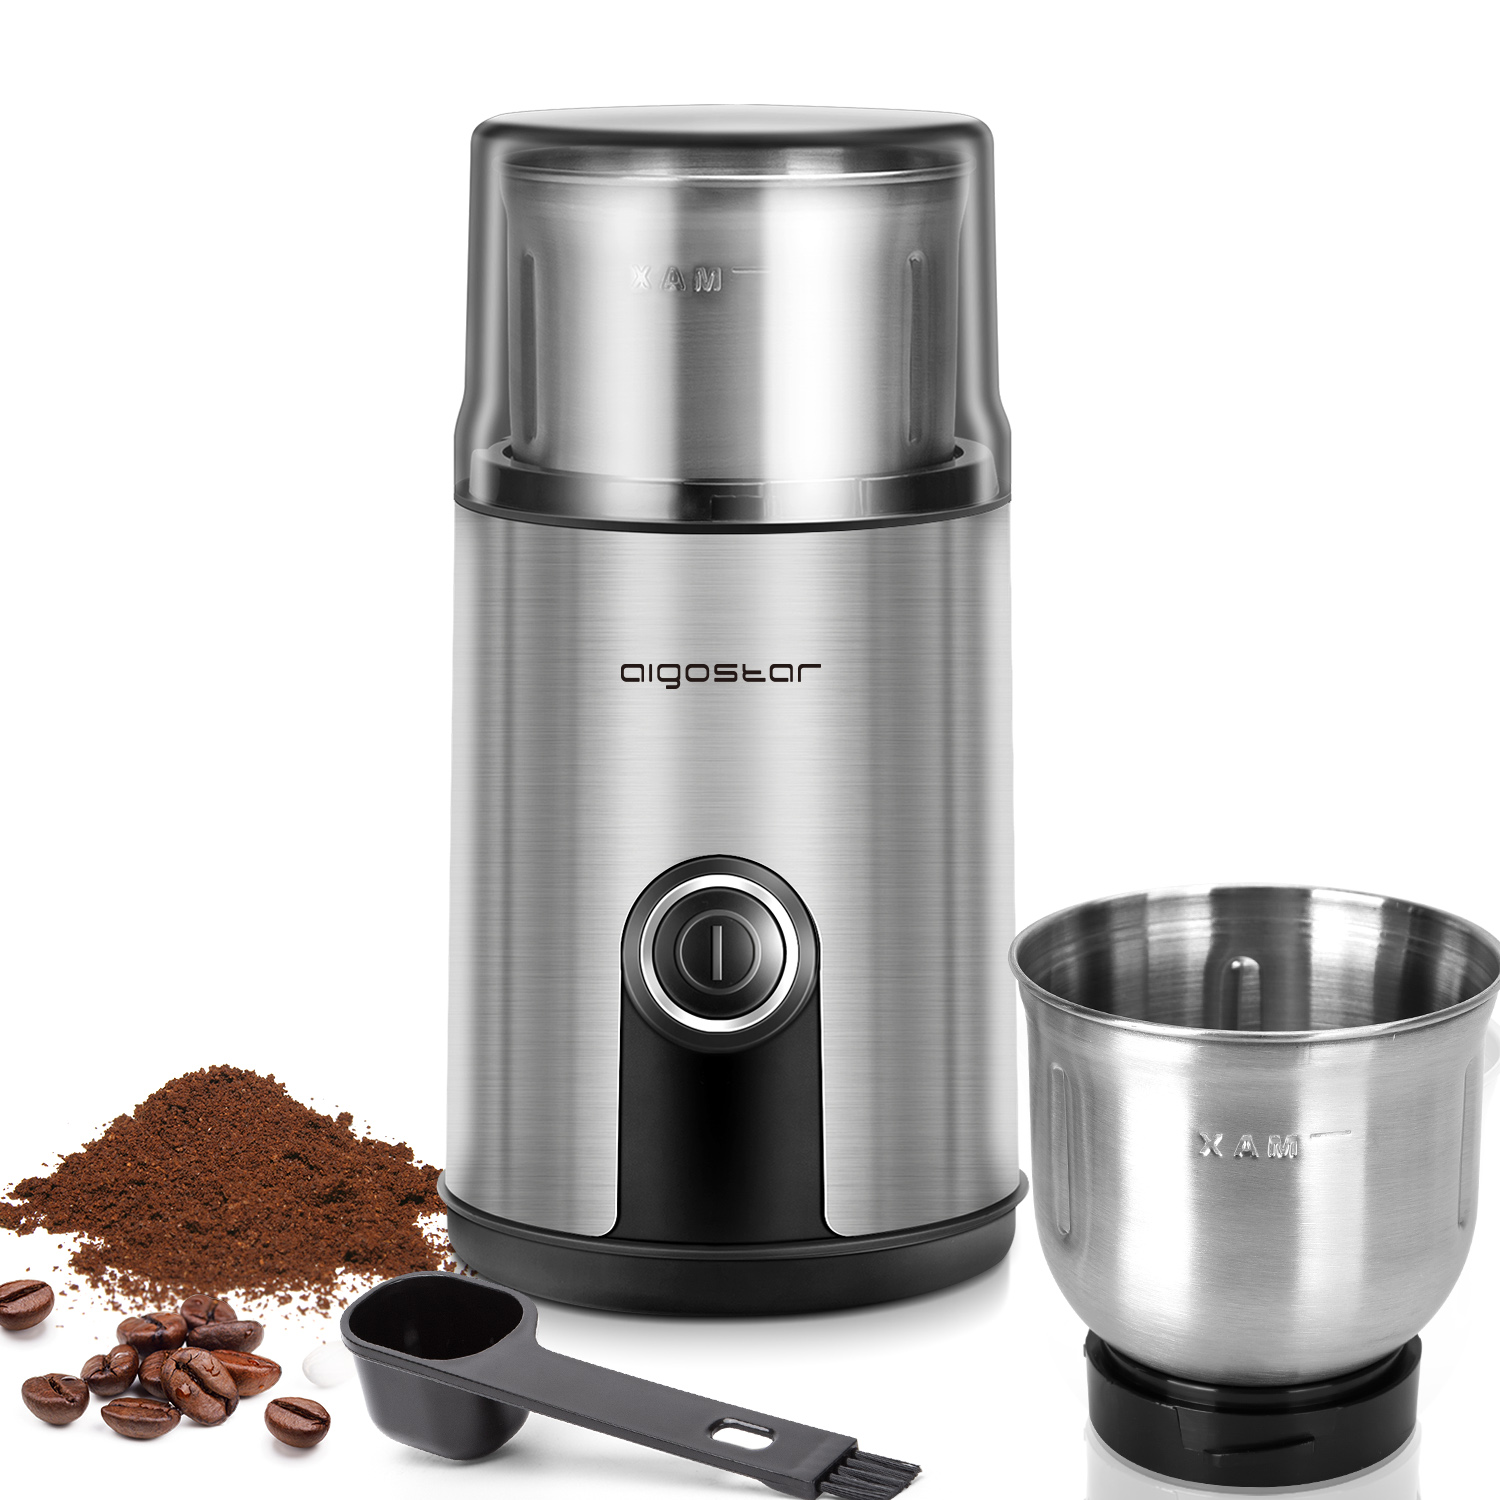 Nuts 75g Capacity 200W Herbs Spice Separated Stainless Steel Blades for Coffee Beans Aigostar Stainless Steel Coffee Grinder Otto 30RYI. Seeds Free Cleaning Brush 